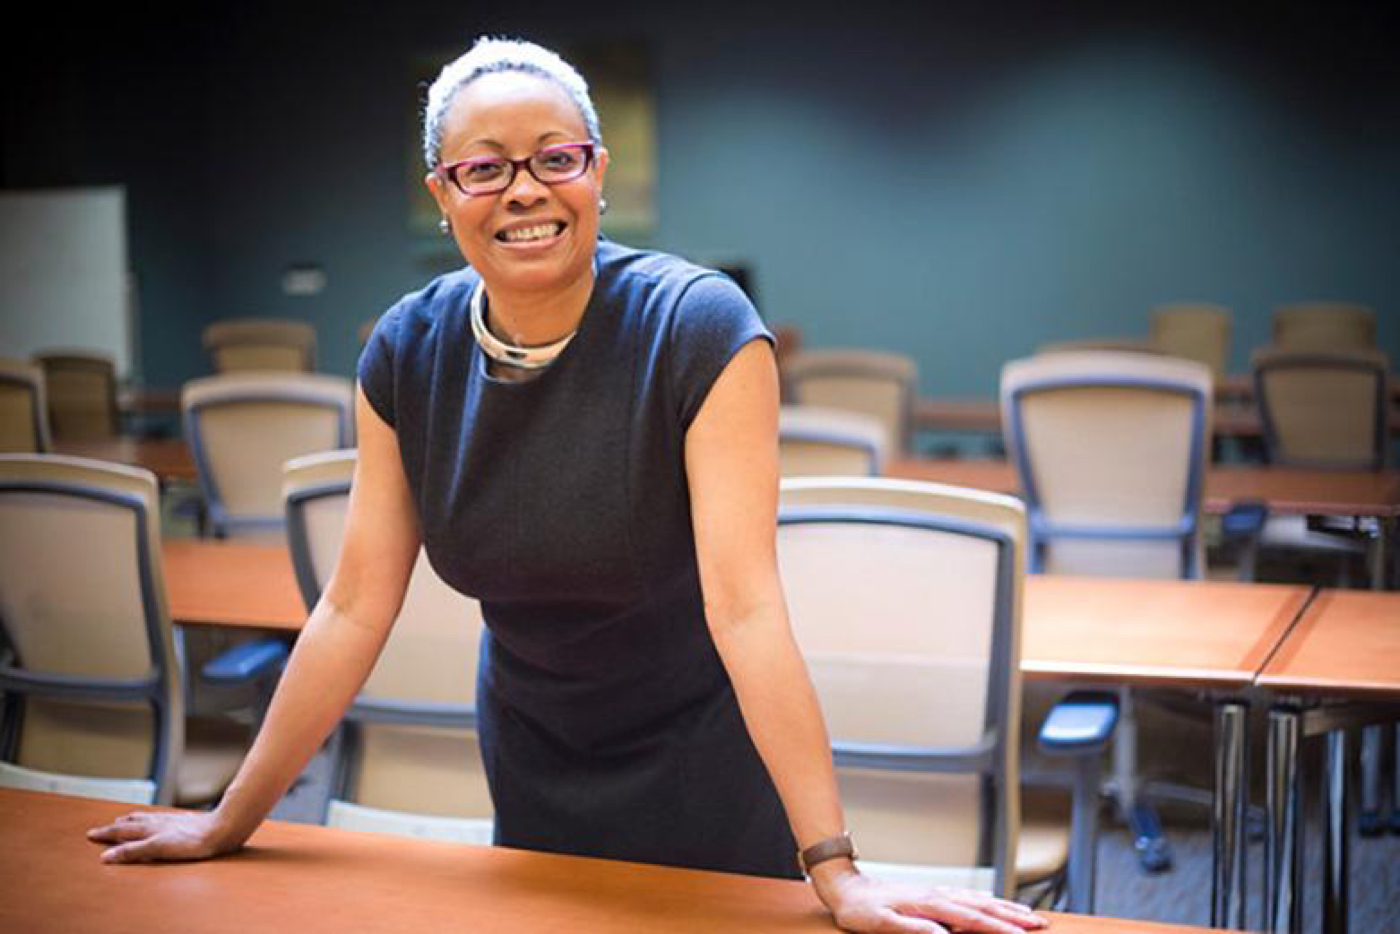 Georgetown Law School tax law professor Dorothy A. Brown offers insight on how the tax code could benefit Black Americans. Photo courtesy of California Black Media.